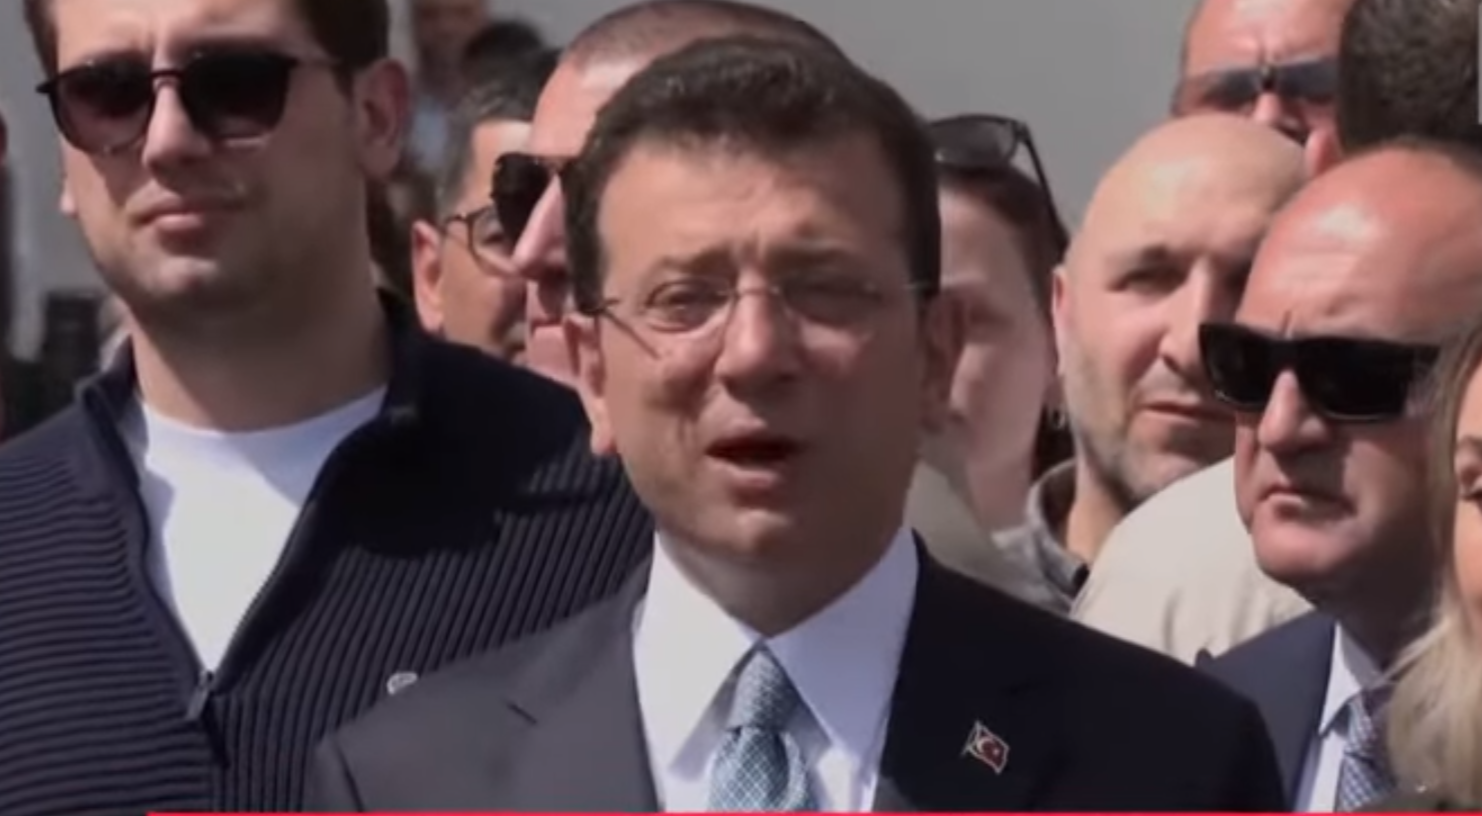 The image of Ekrem Imamoglu post-election symbolizes a significant shift in Turkish politics, challenging established power dynamics. Widely covered by reputable sources, his victory represents a beacon of hope for democracy and progress. This visual narrative underscores Imamoglu's leadership and the nation's aspiration for change.